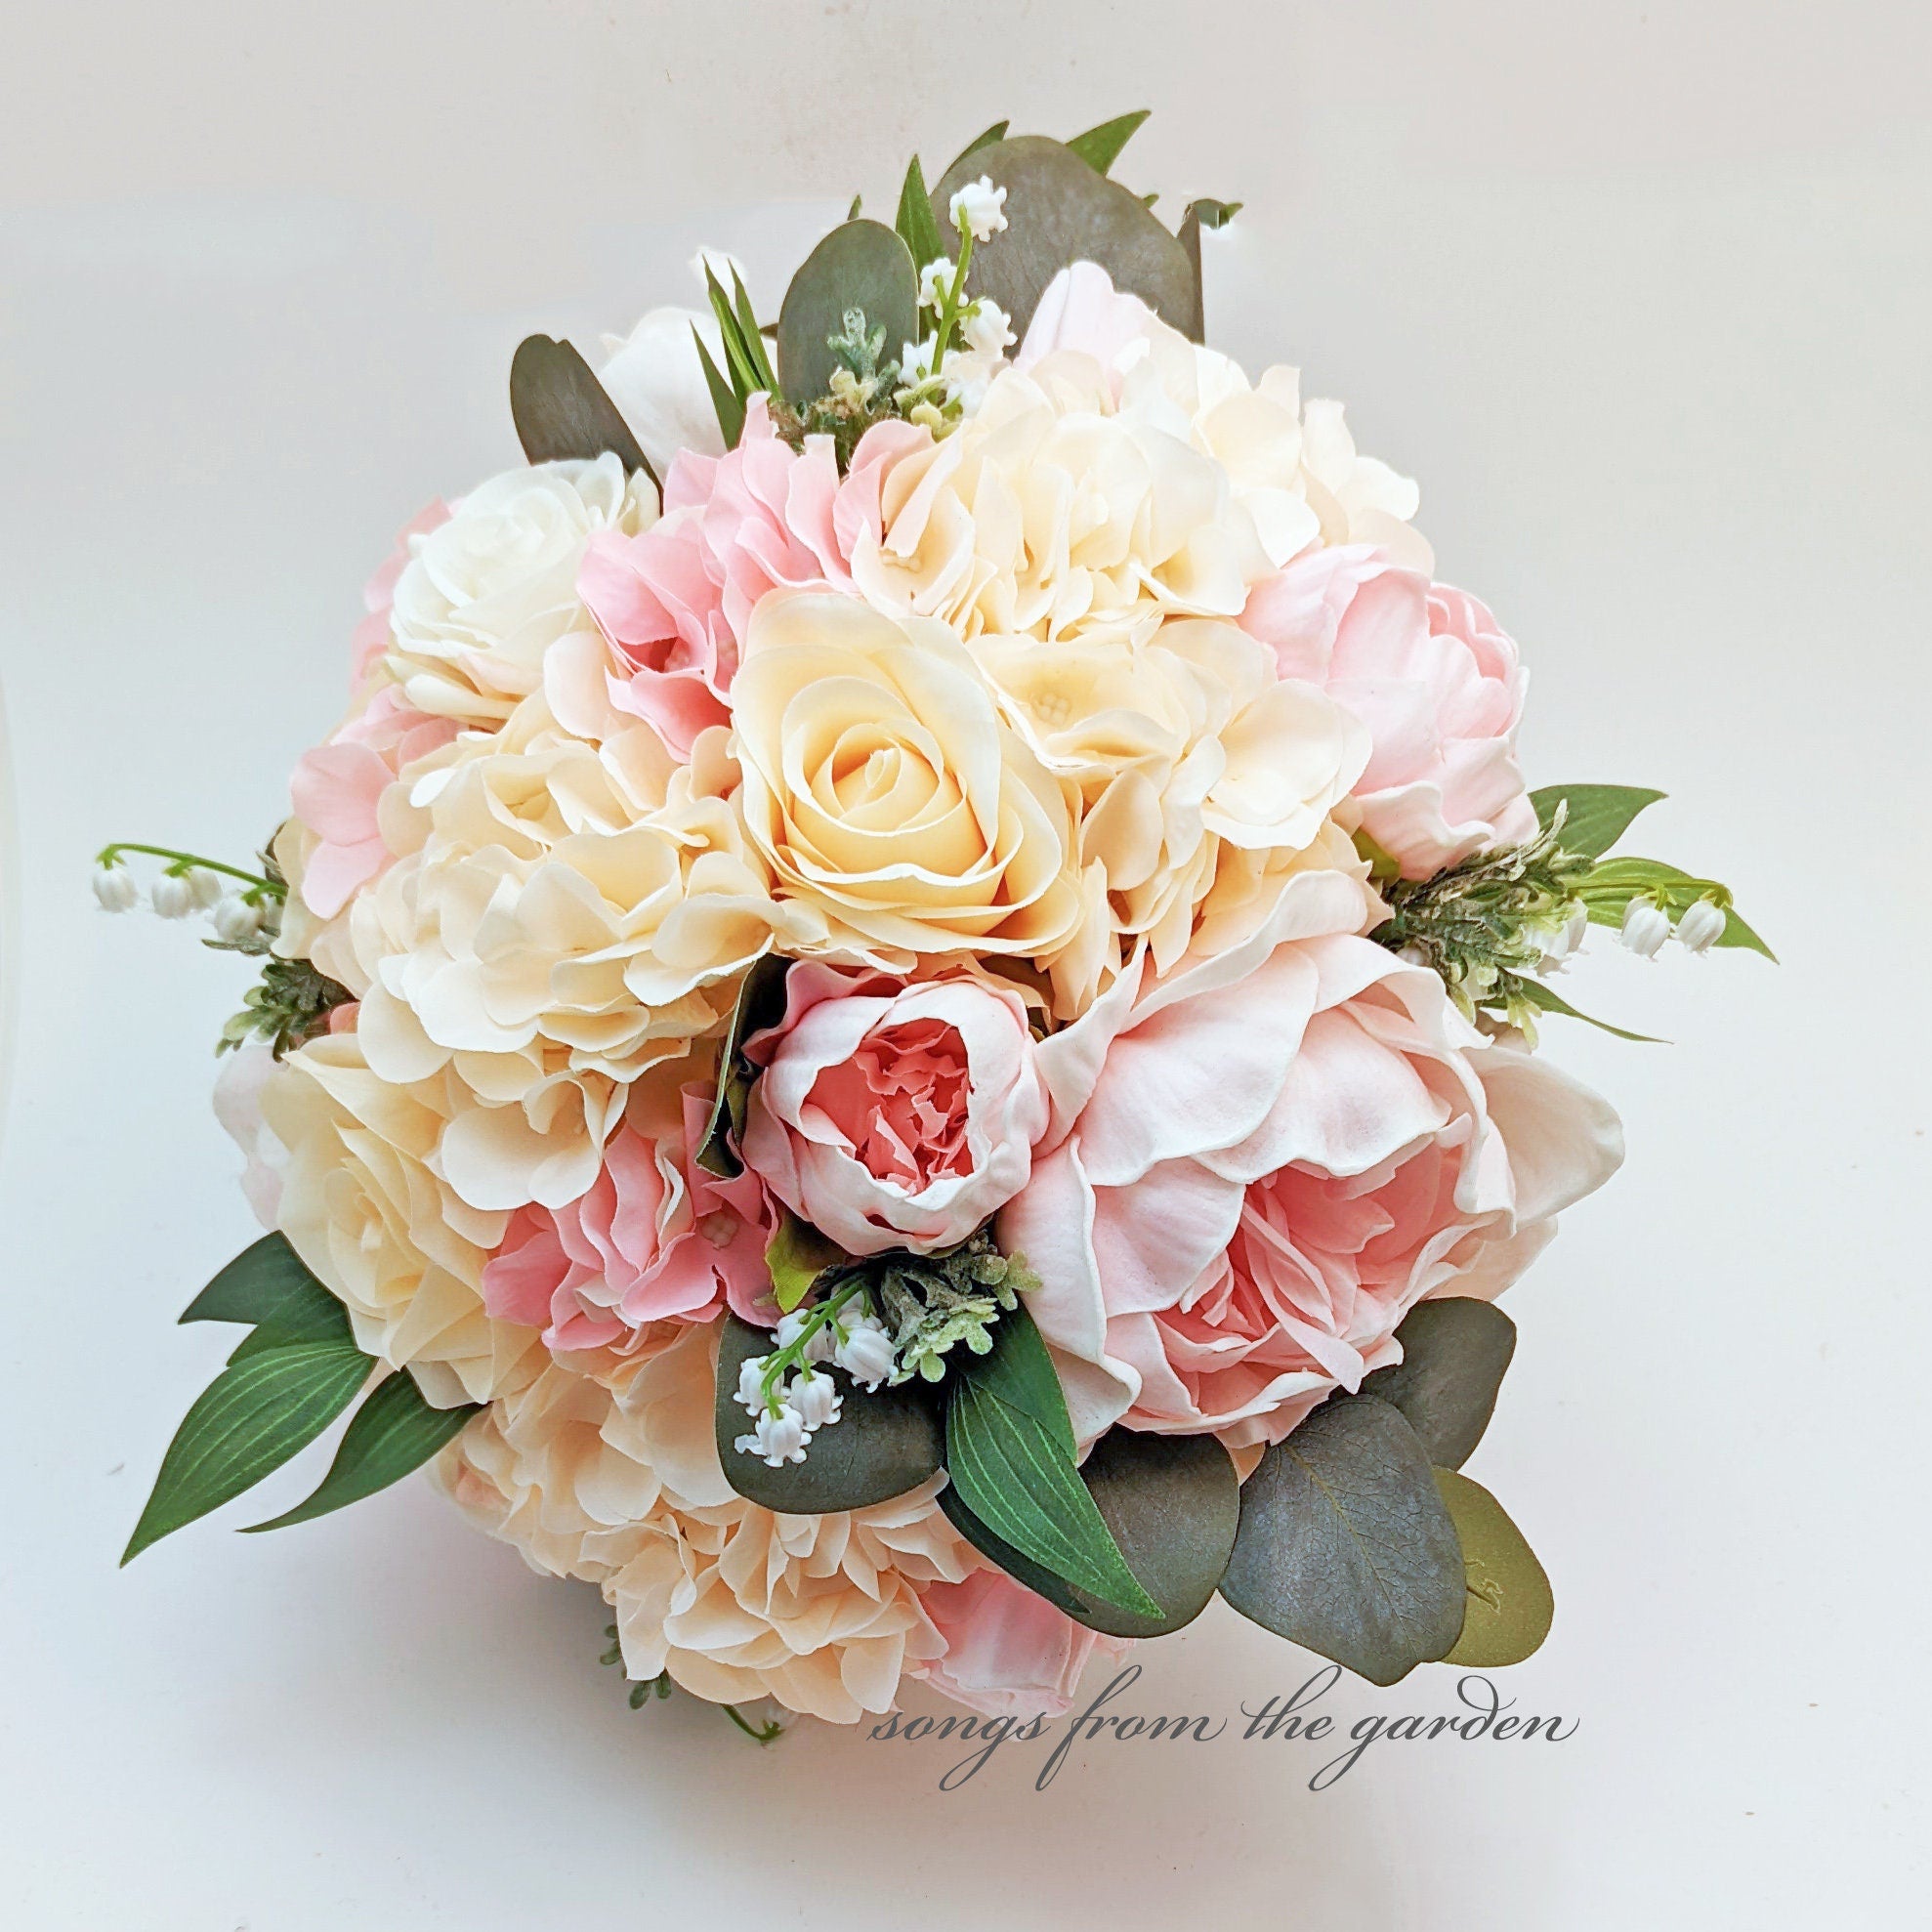 Bridal Bridesmaid Wedding Bouquet Eucalyptus Lily of the Valley Peonies Roses Hydrangea Peach Pink White - Add Boutonniere Flower Crown More